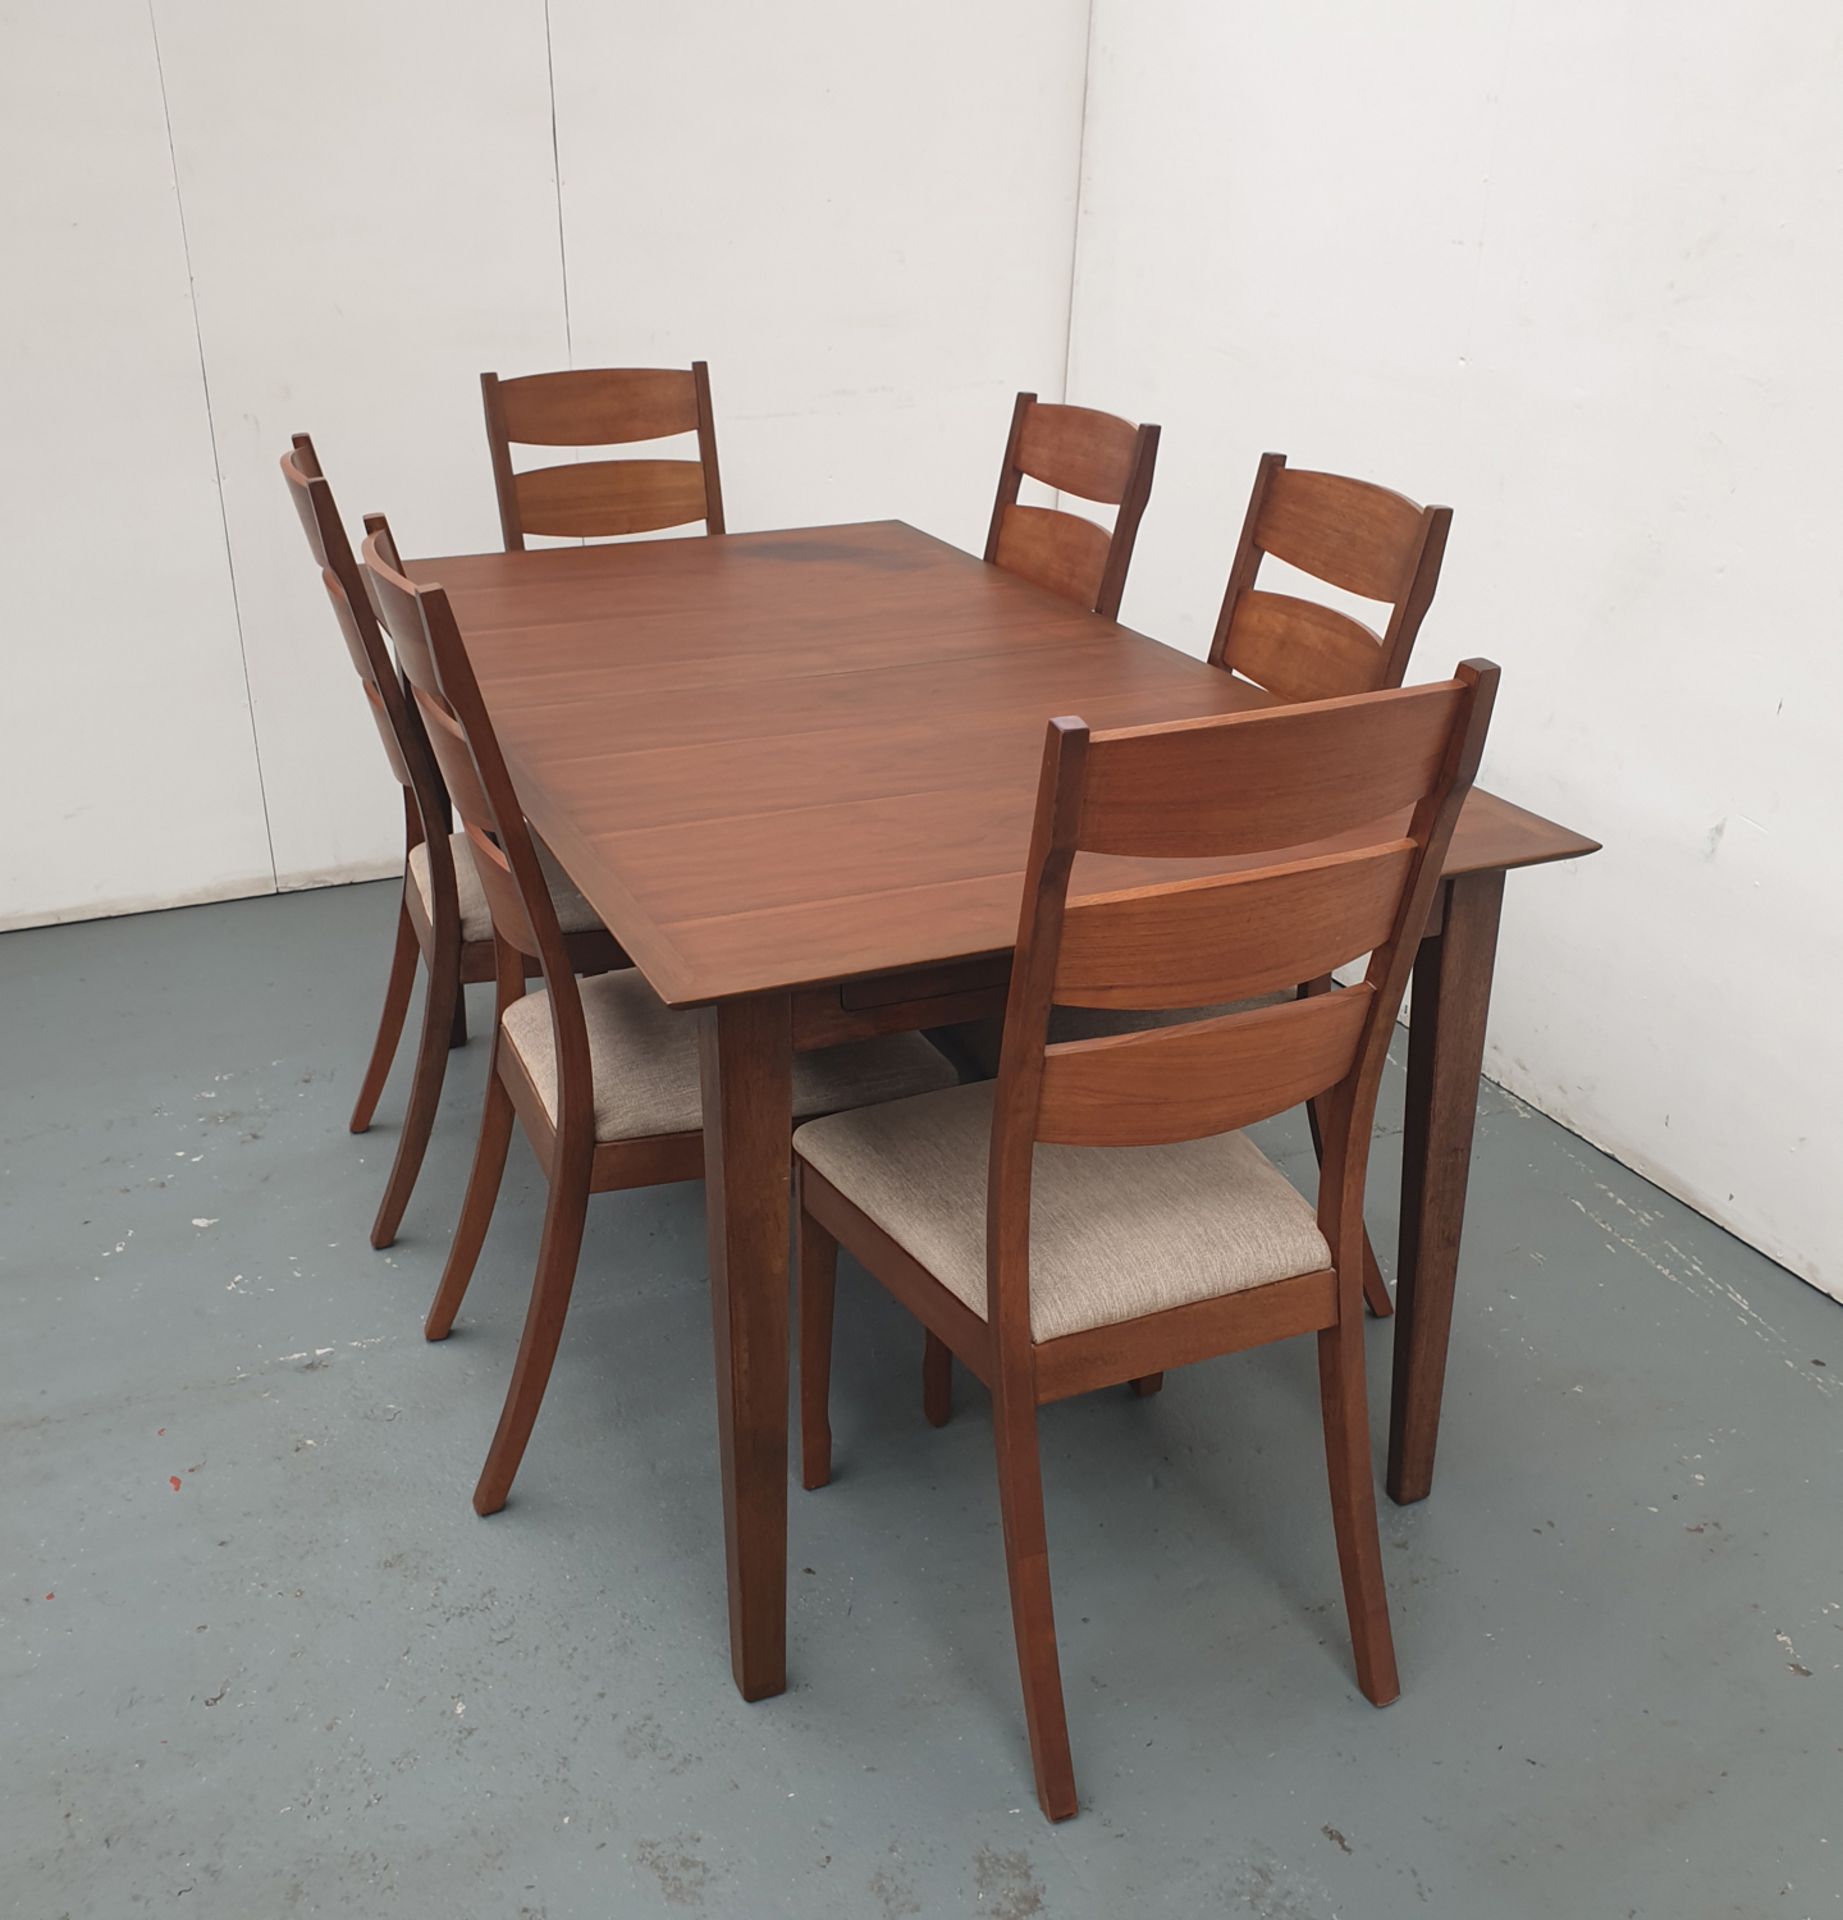 Solid Wood Dining Table & Chairs. Approx Dimensions 1700mm x 900mm x 780mm High. - Image 2 of 11